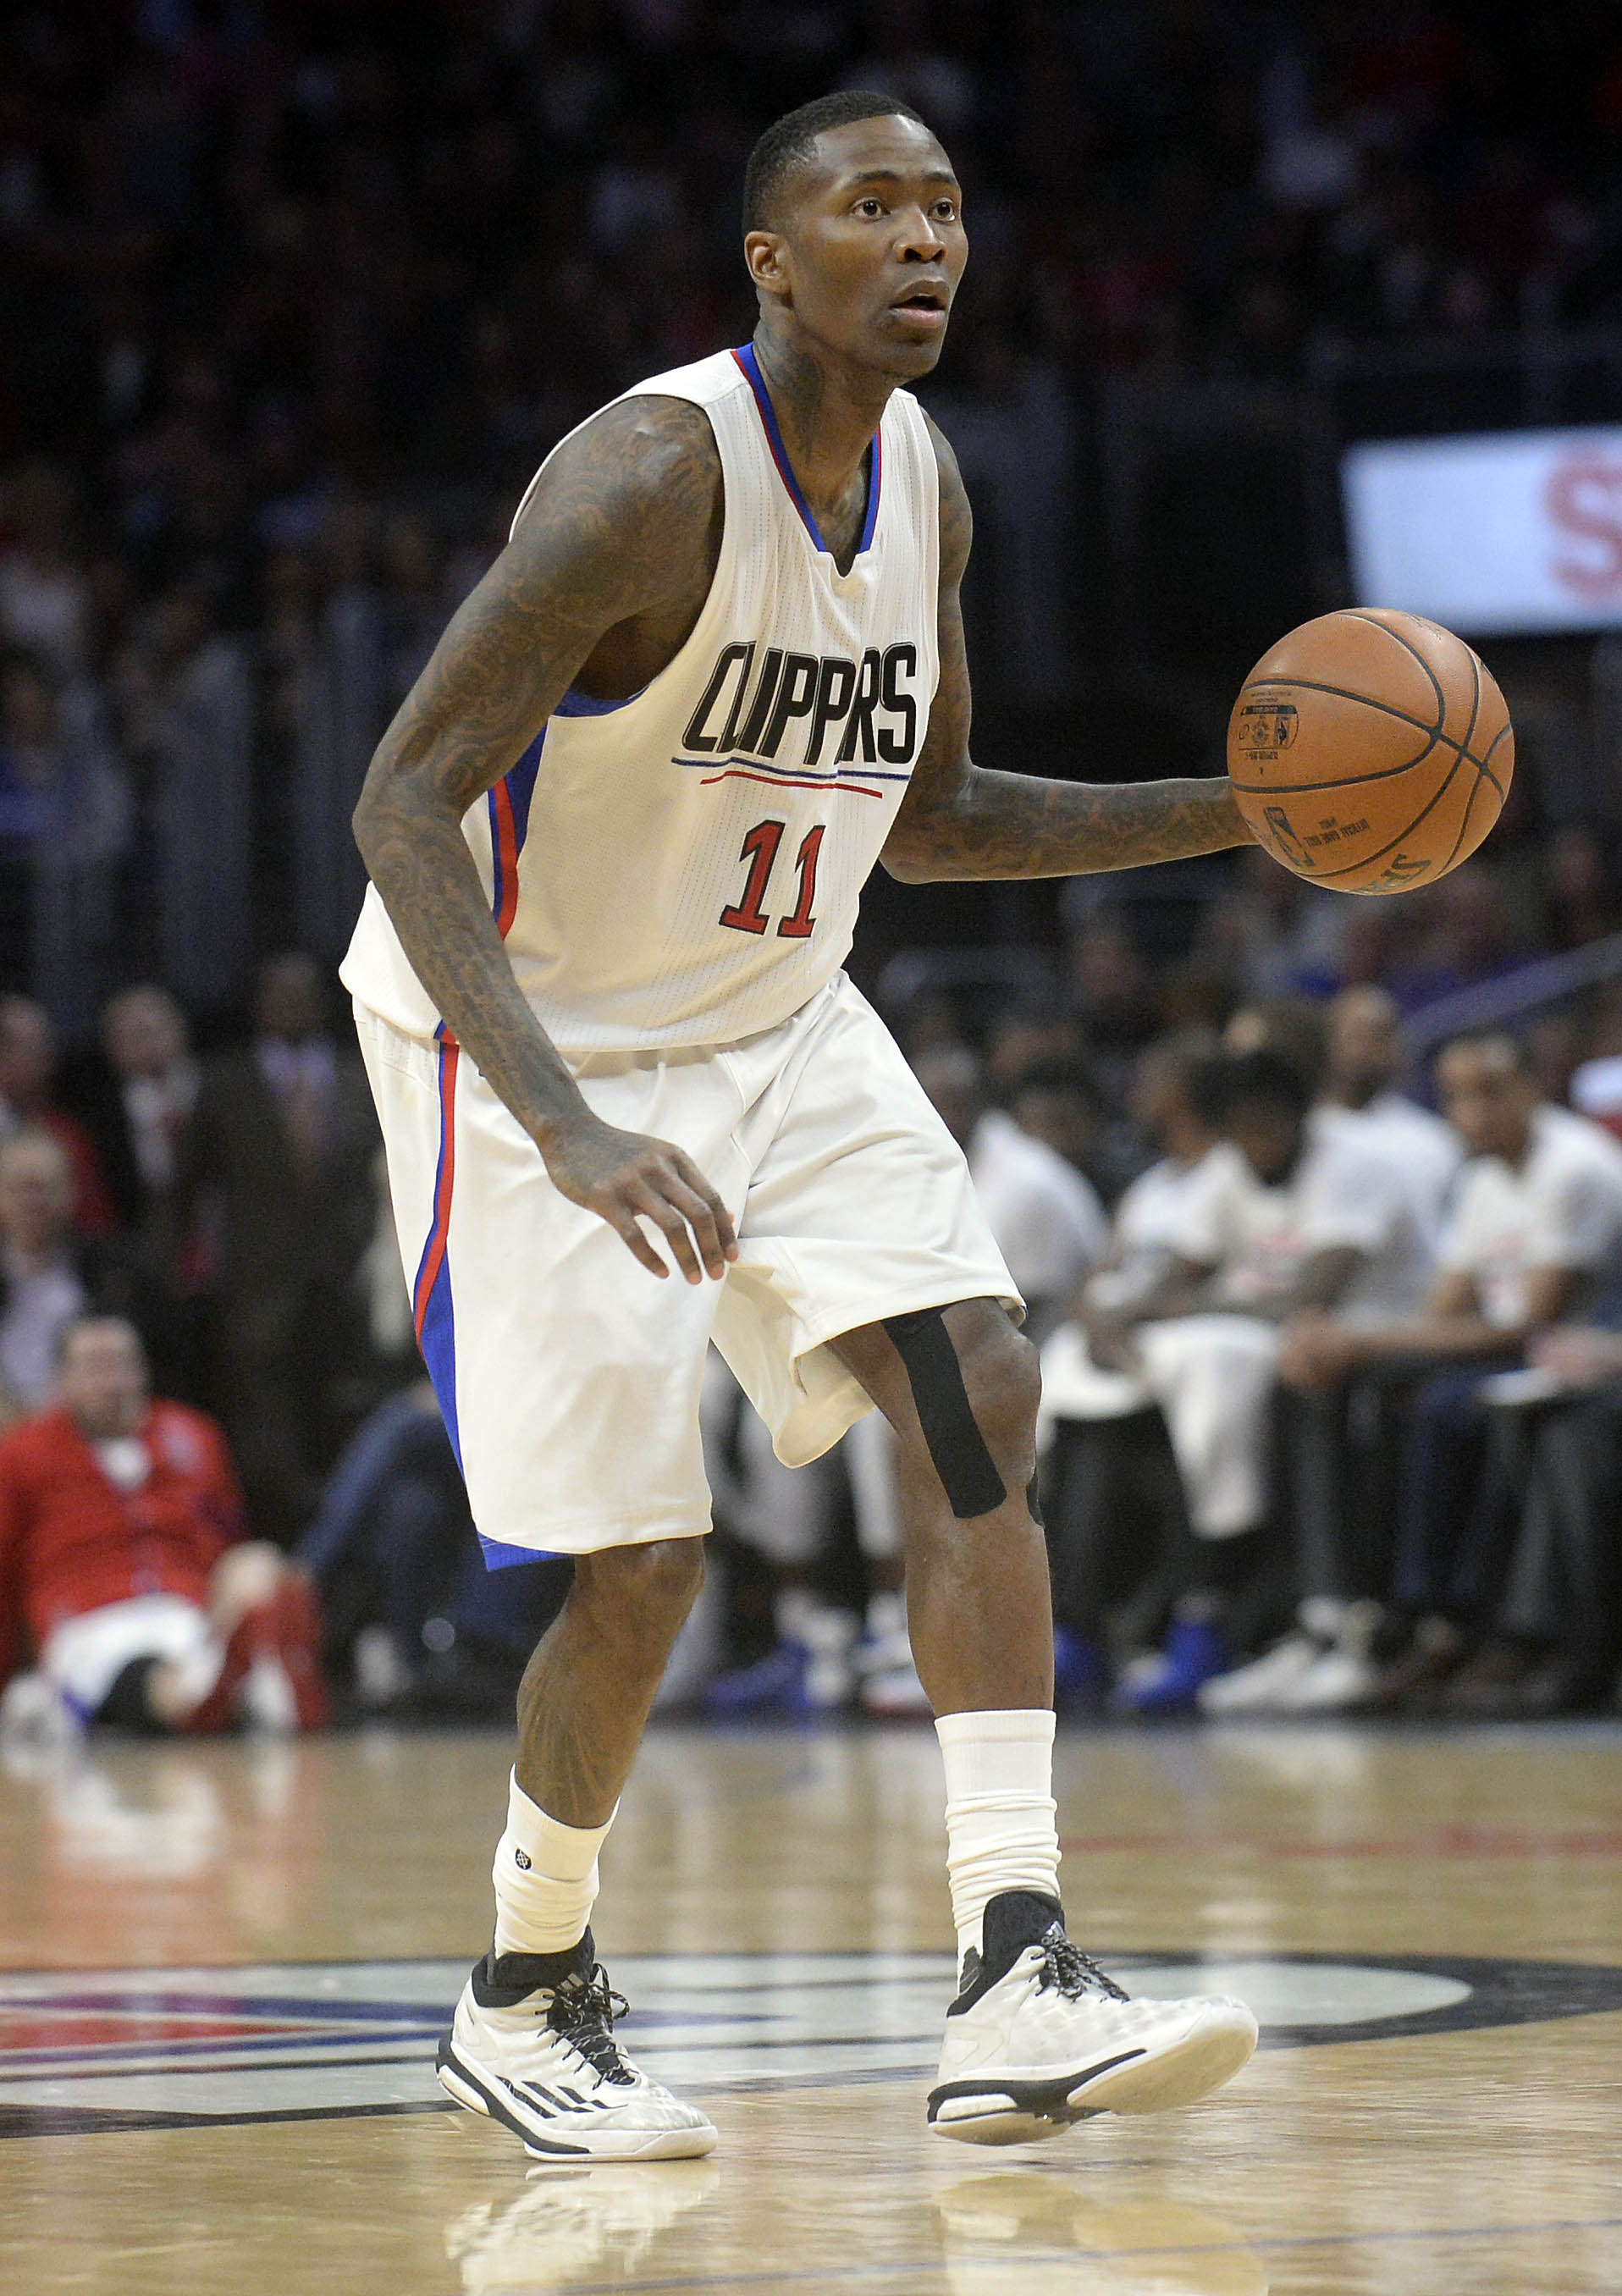 Jamal Crawford signs 2-year deal with Timberwolves over Cavs